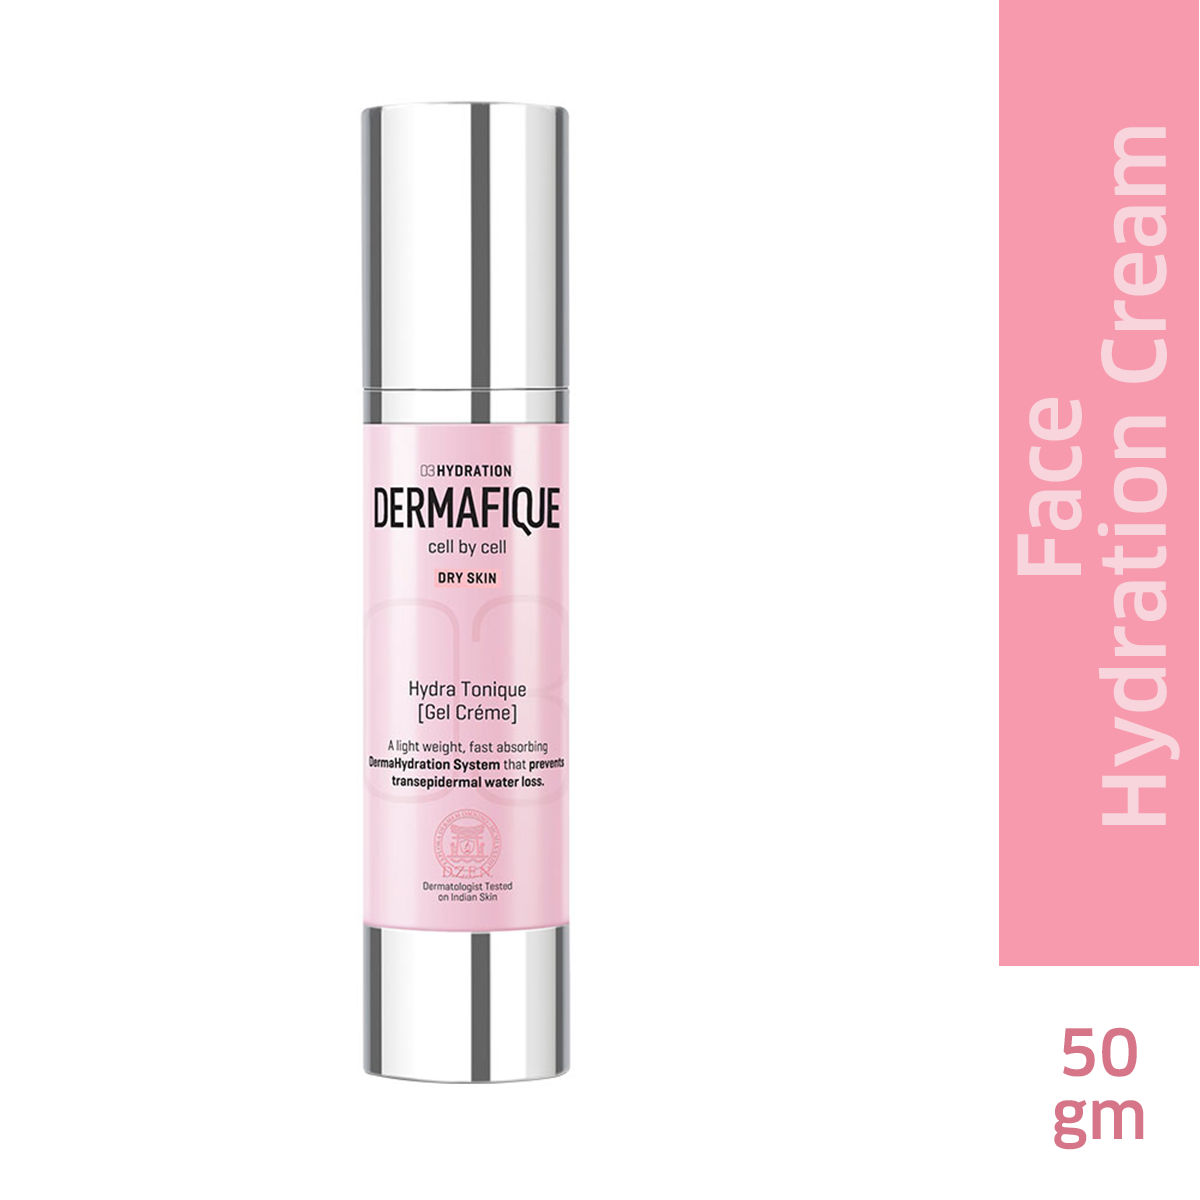 Dermafique Hydratonique Gel Creme Hydrating moisturizer with Niacinamide & Vitamin E, for dry skin